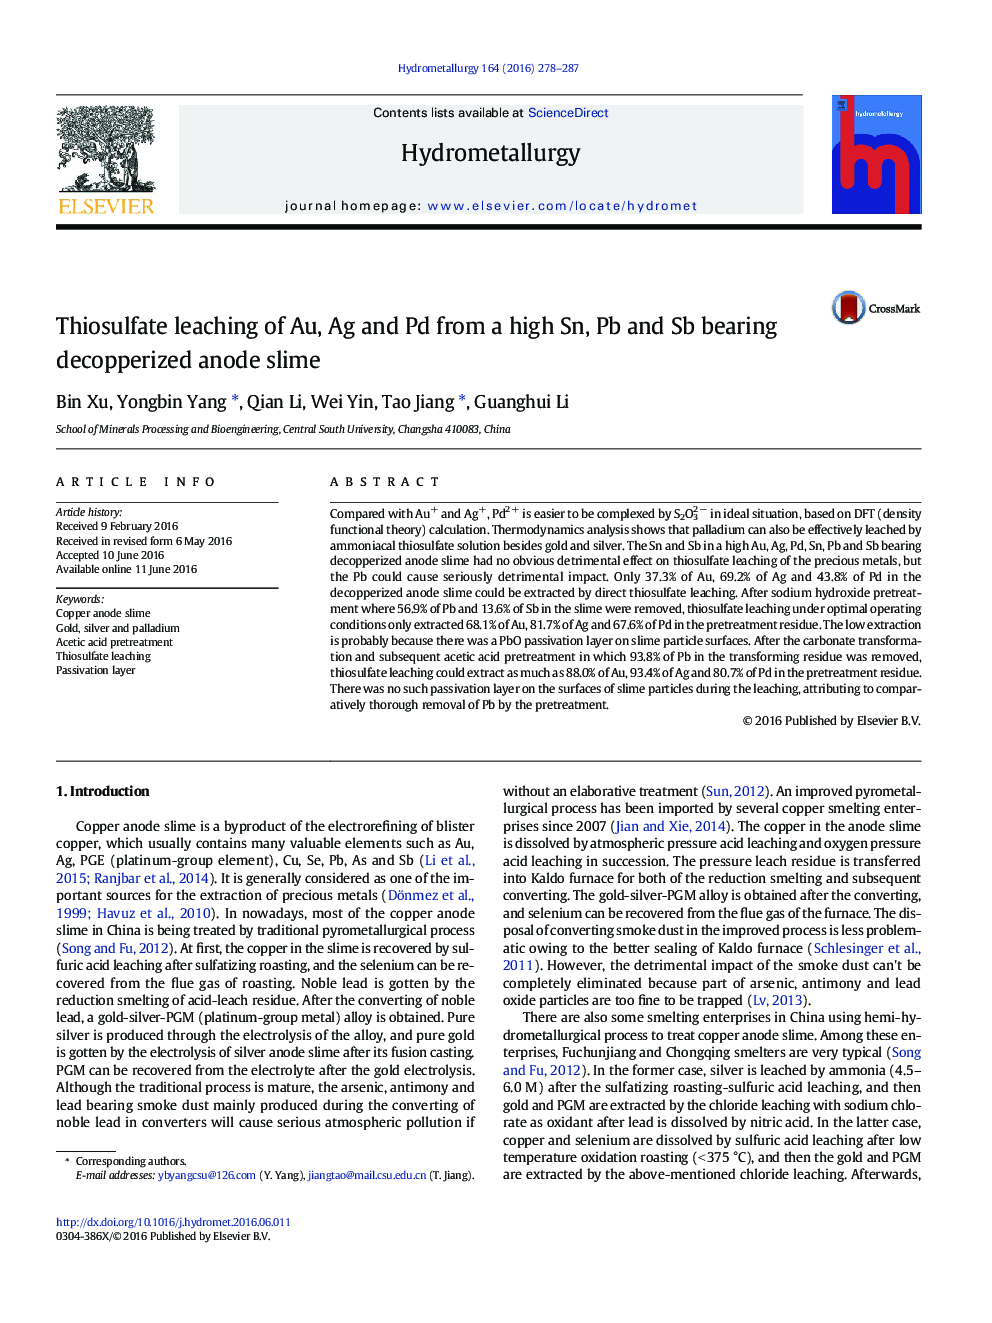 Thiosulfate leaching of Au, Ag and Pd from a high Sn, Pb and Sb bearing decopperized anode slime